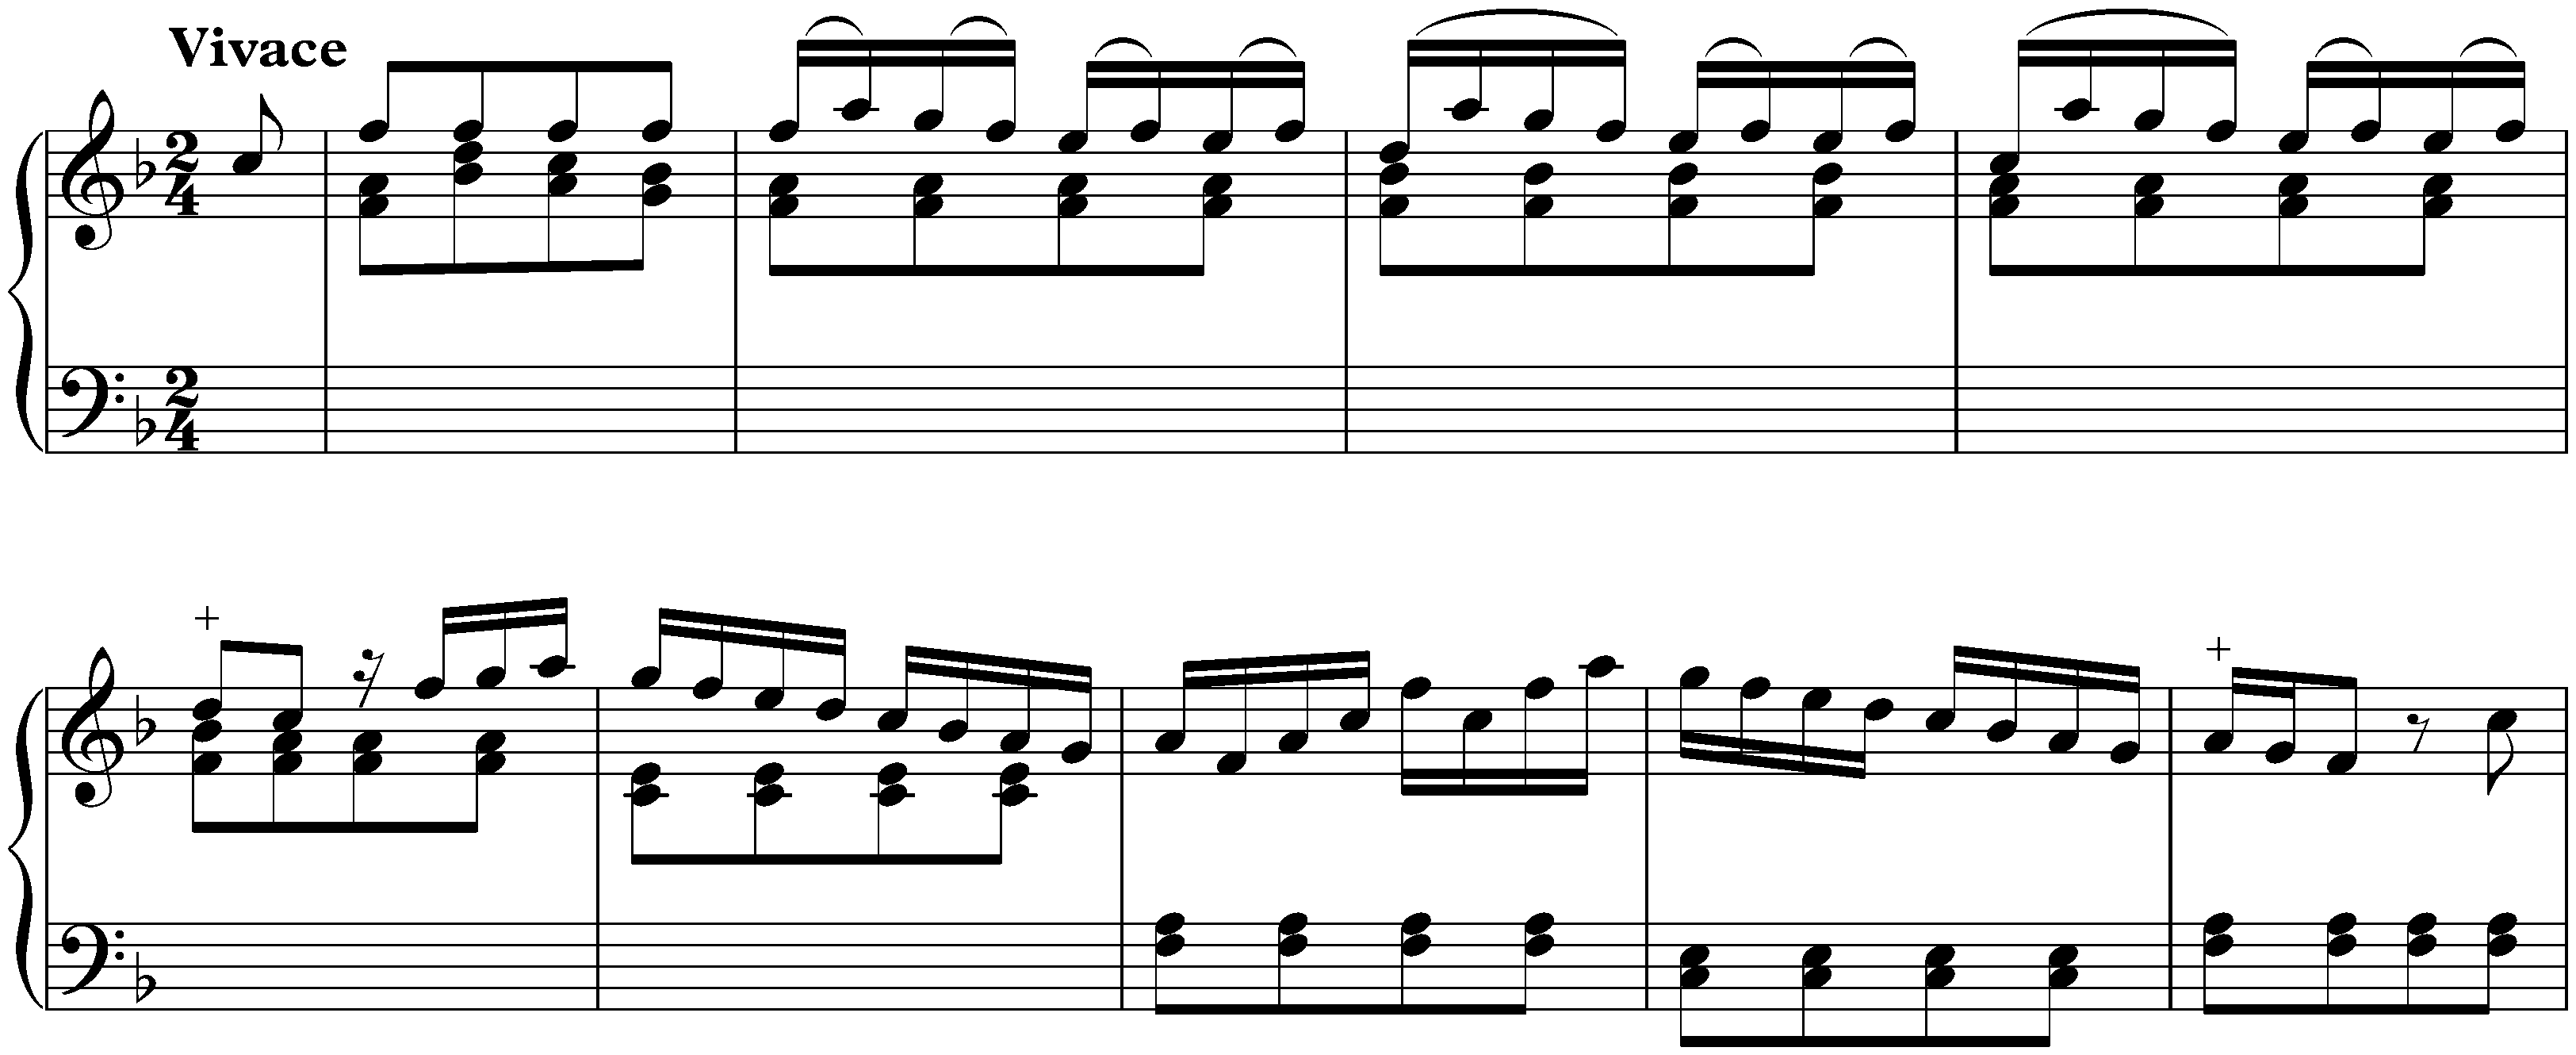 Sonatas published by Boivin; 3. F major